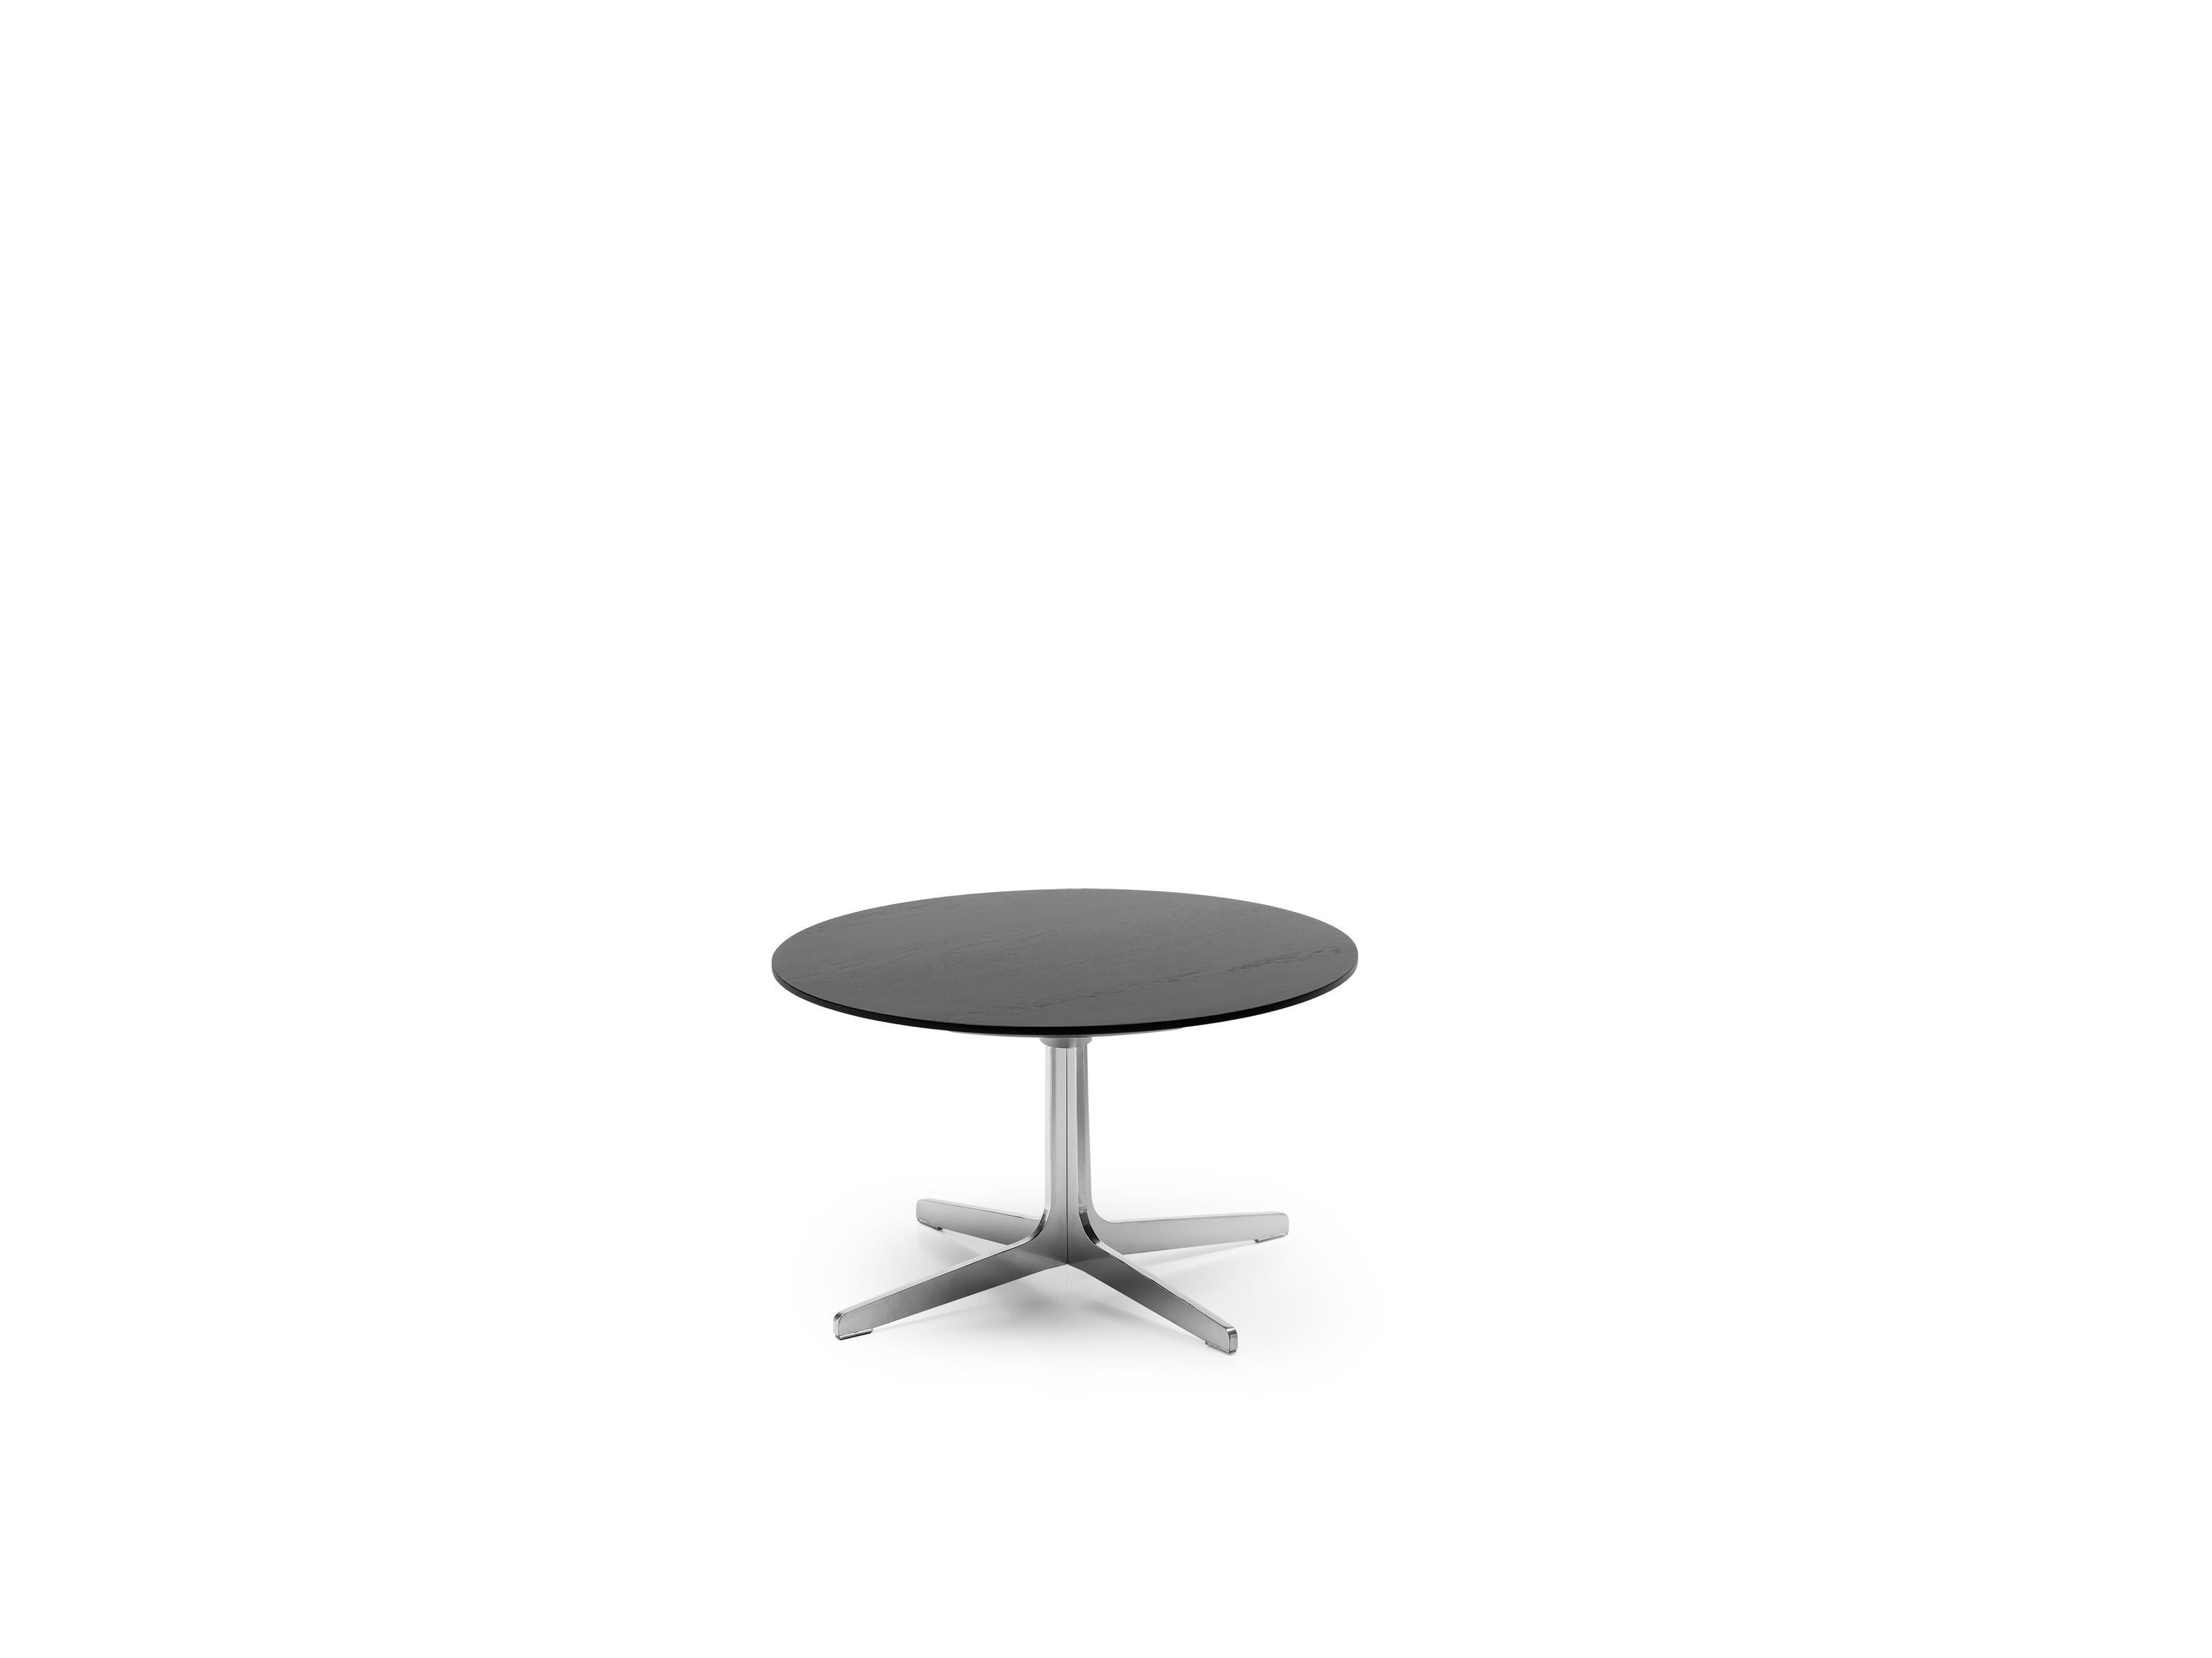 DS-144 lounge table by De Sede
Design: Werner Aisslinger
Dimensions: D 50 x W 61 x H 37 cm
Materials: high-gloss chrome-plated steel, nero oak

Prices may change according to the chosen materials and size. 

Sit the way you would sit in a